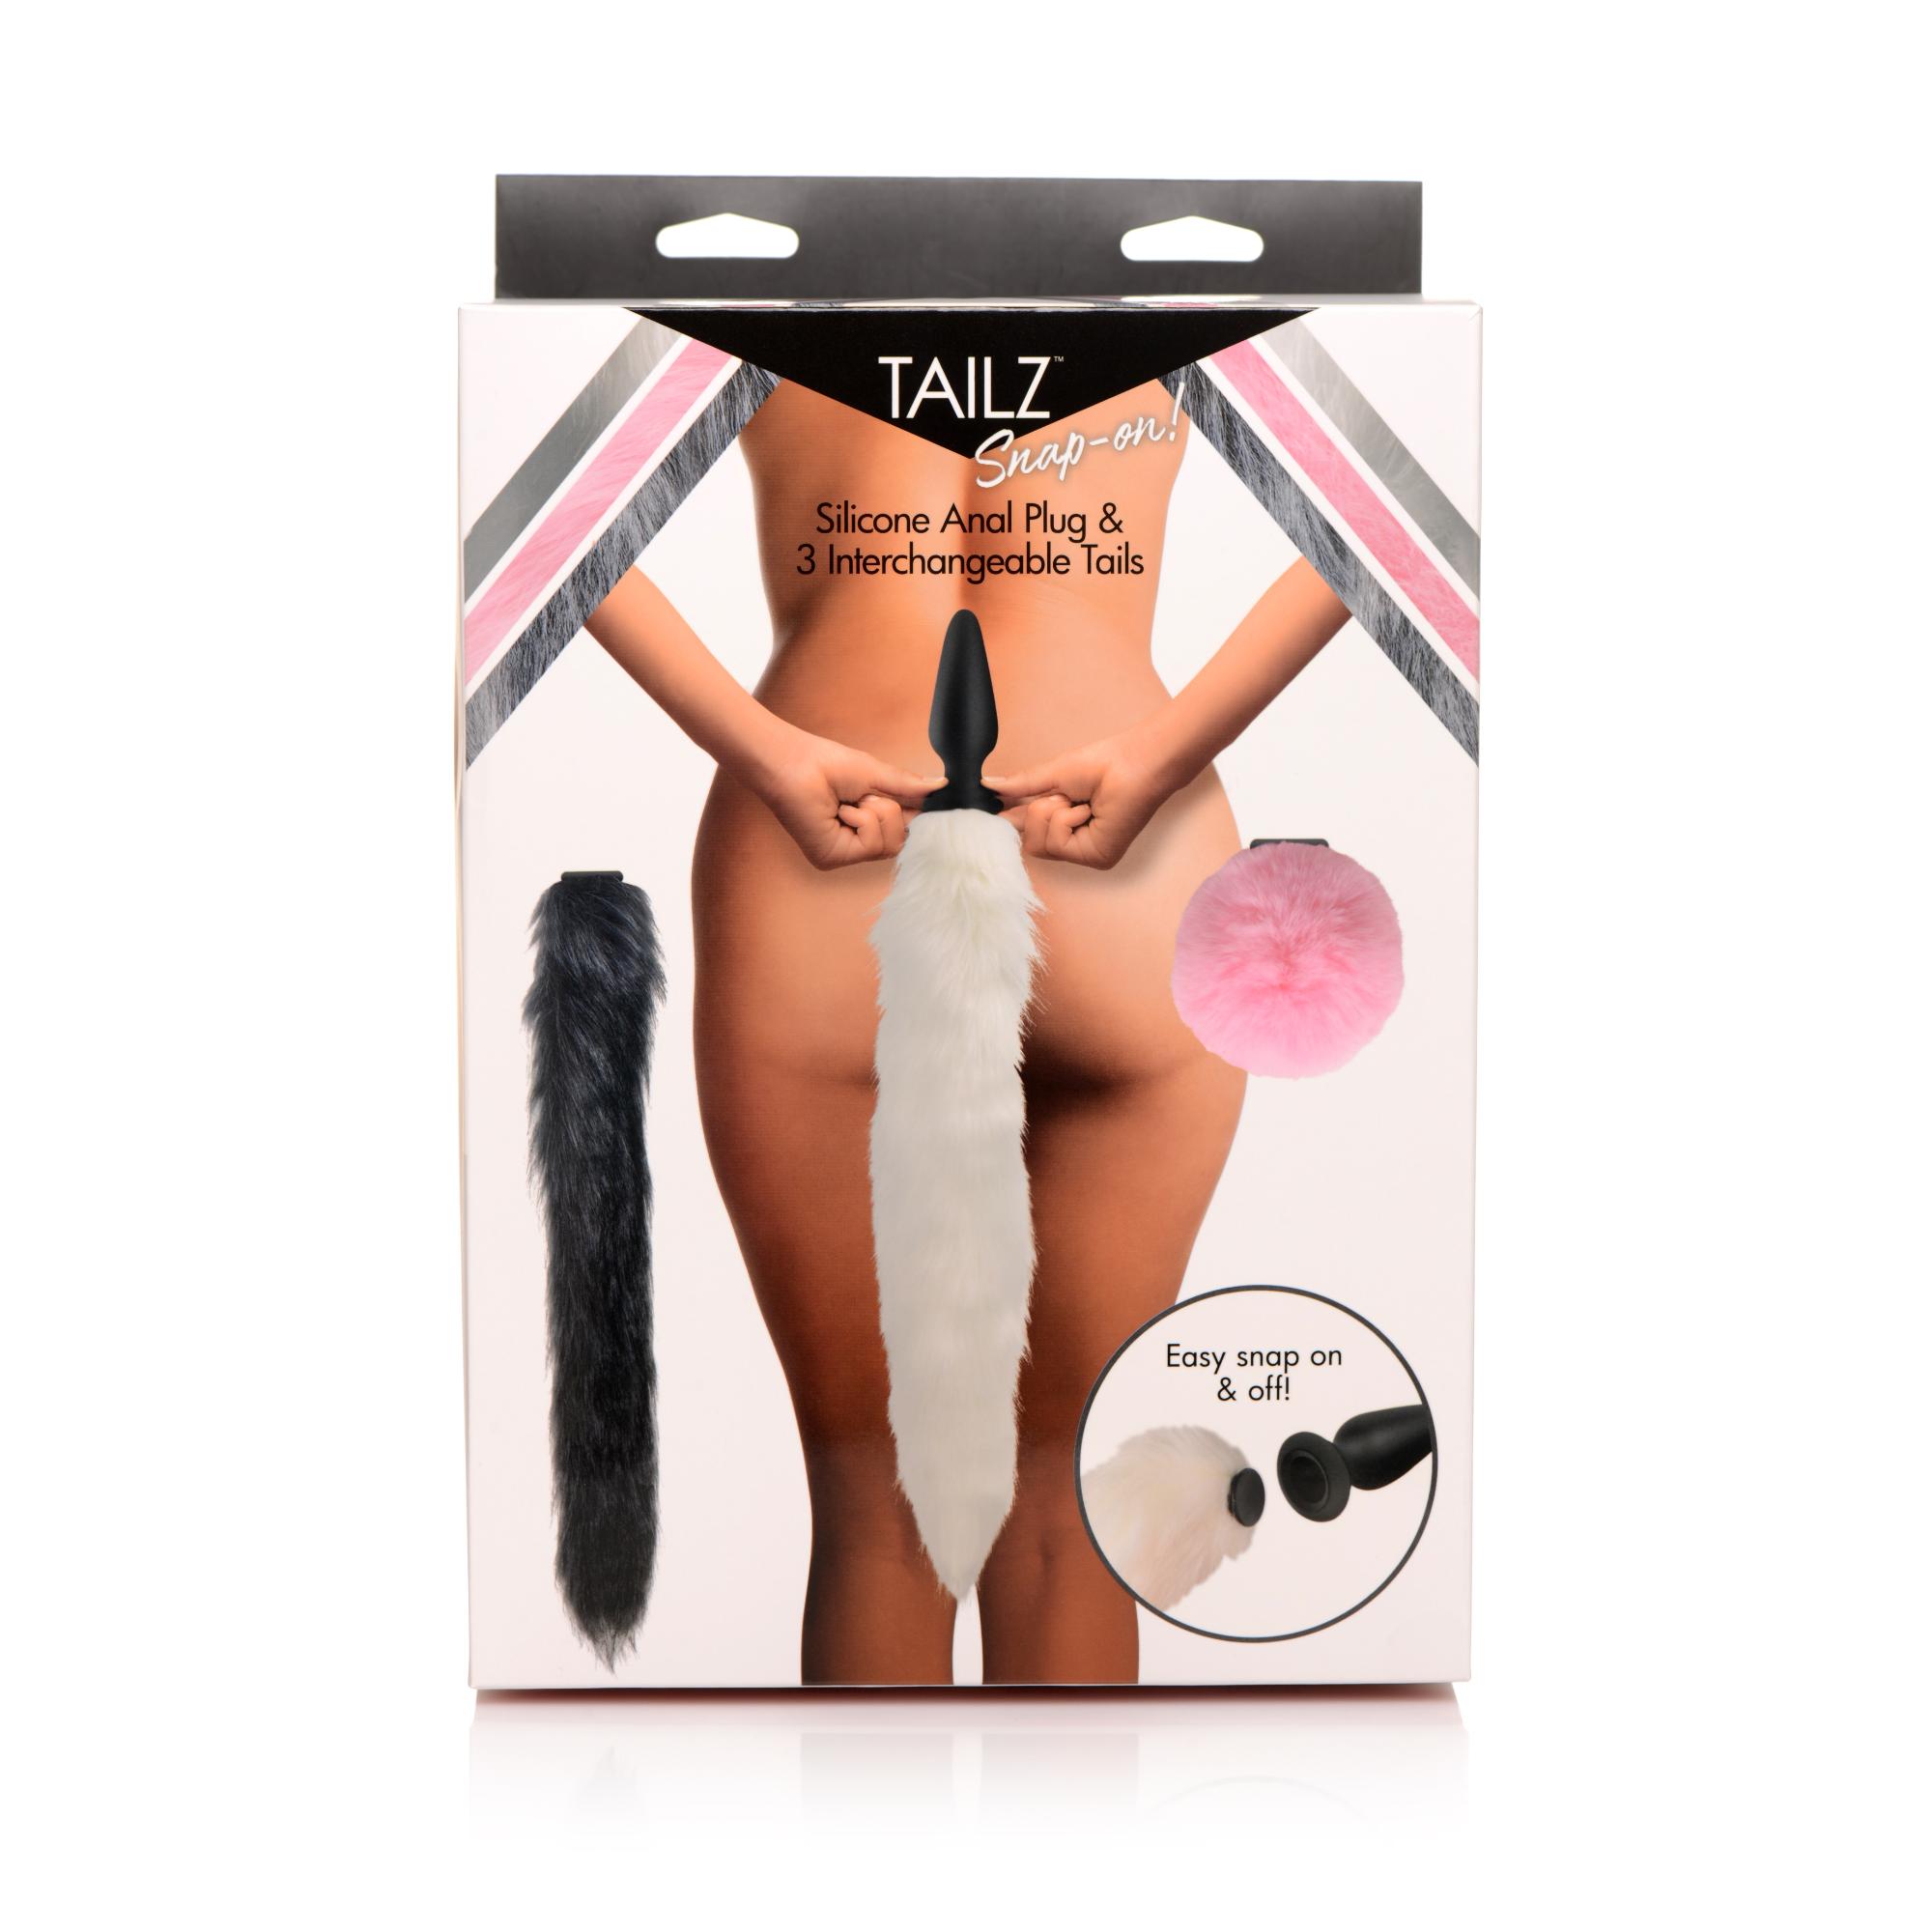 Tailz Silicone Anal Plug & 3 Interchangeable Tails